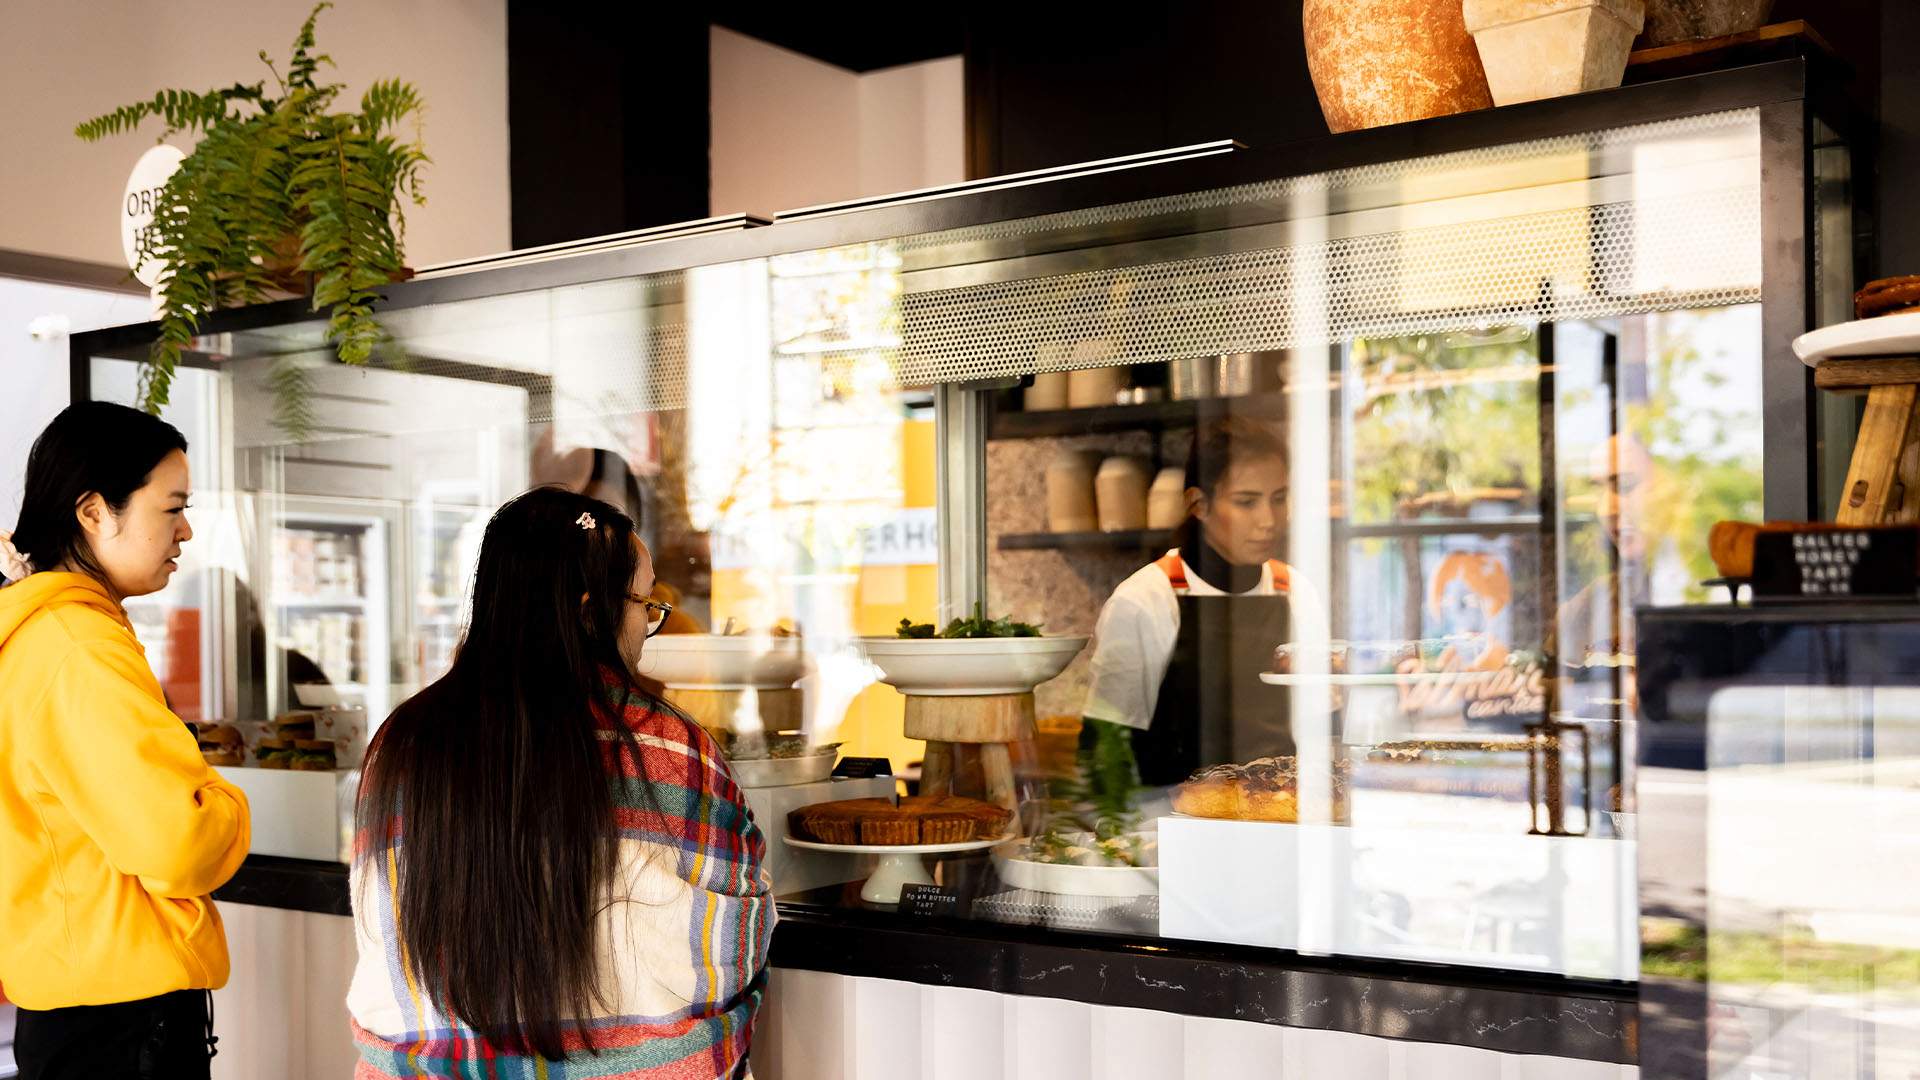 Now Open: Salma's Canteen Has Officially Arrived in Rosebery From the Saga and Kepos Teams